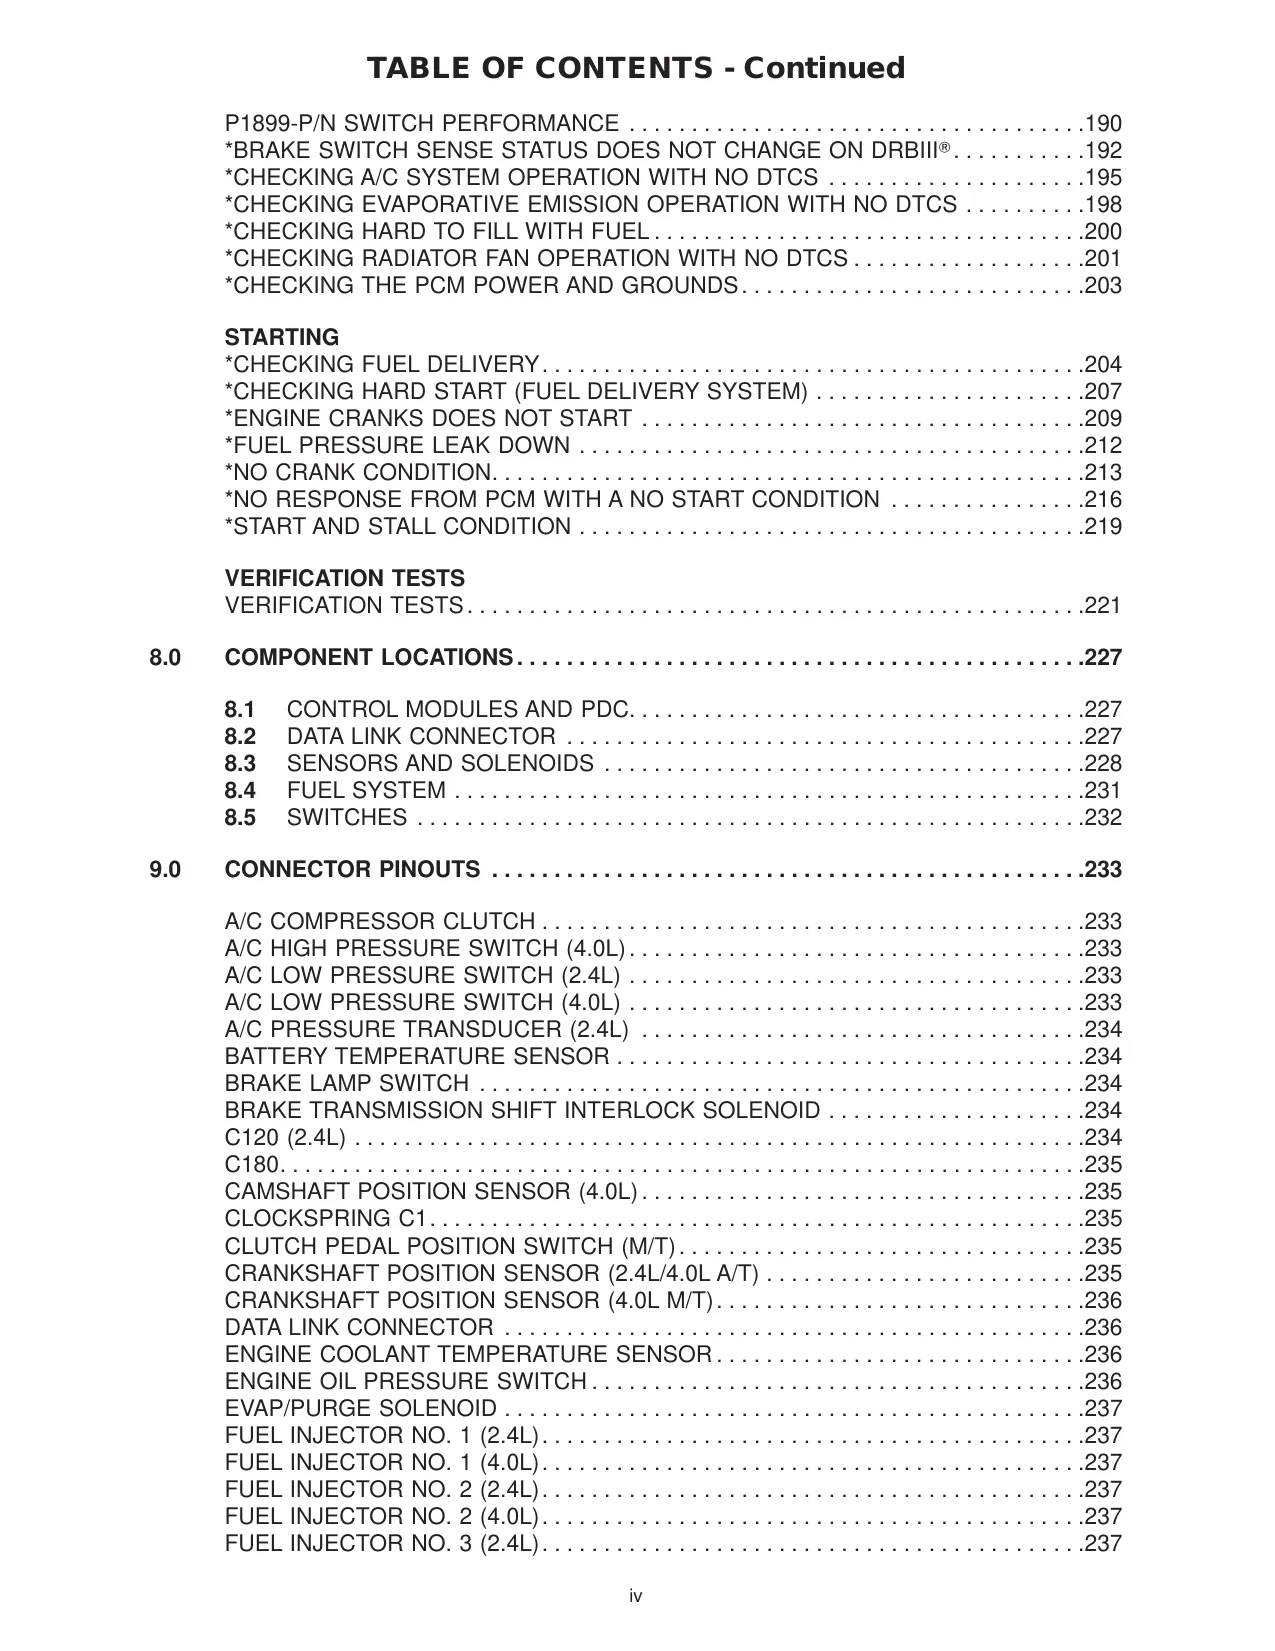 2003 Jeep Wrangler SUV repair and service manual Preview image 4